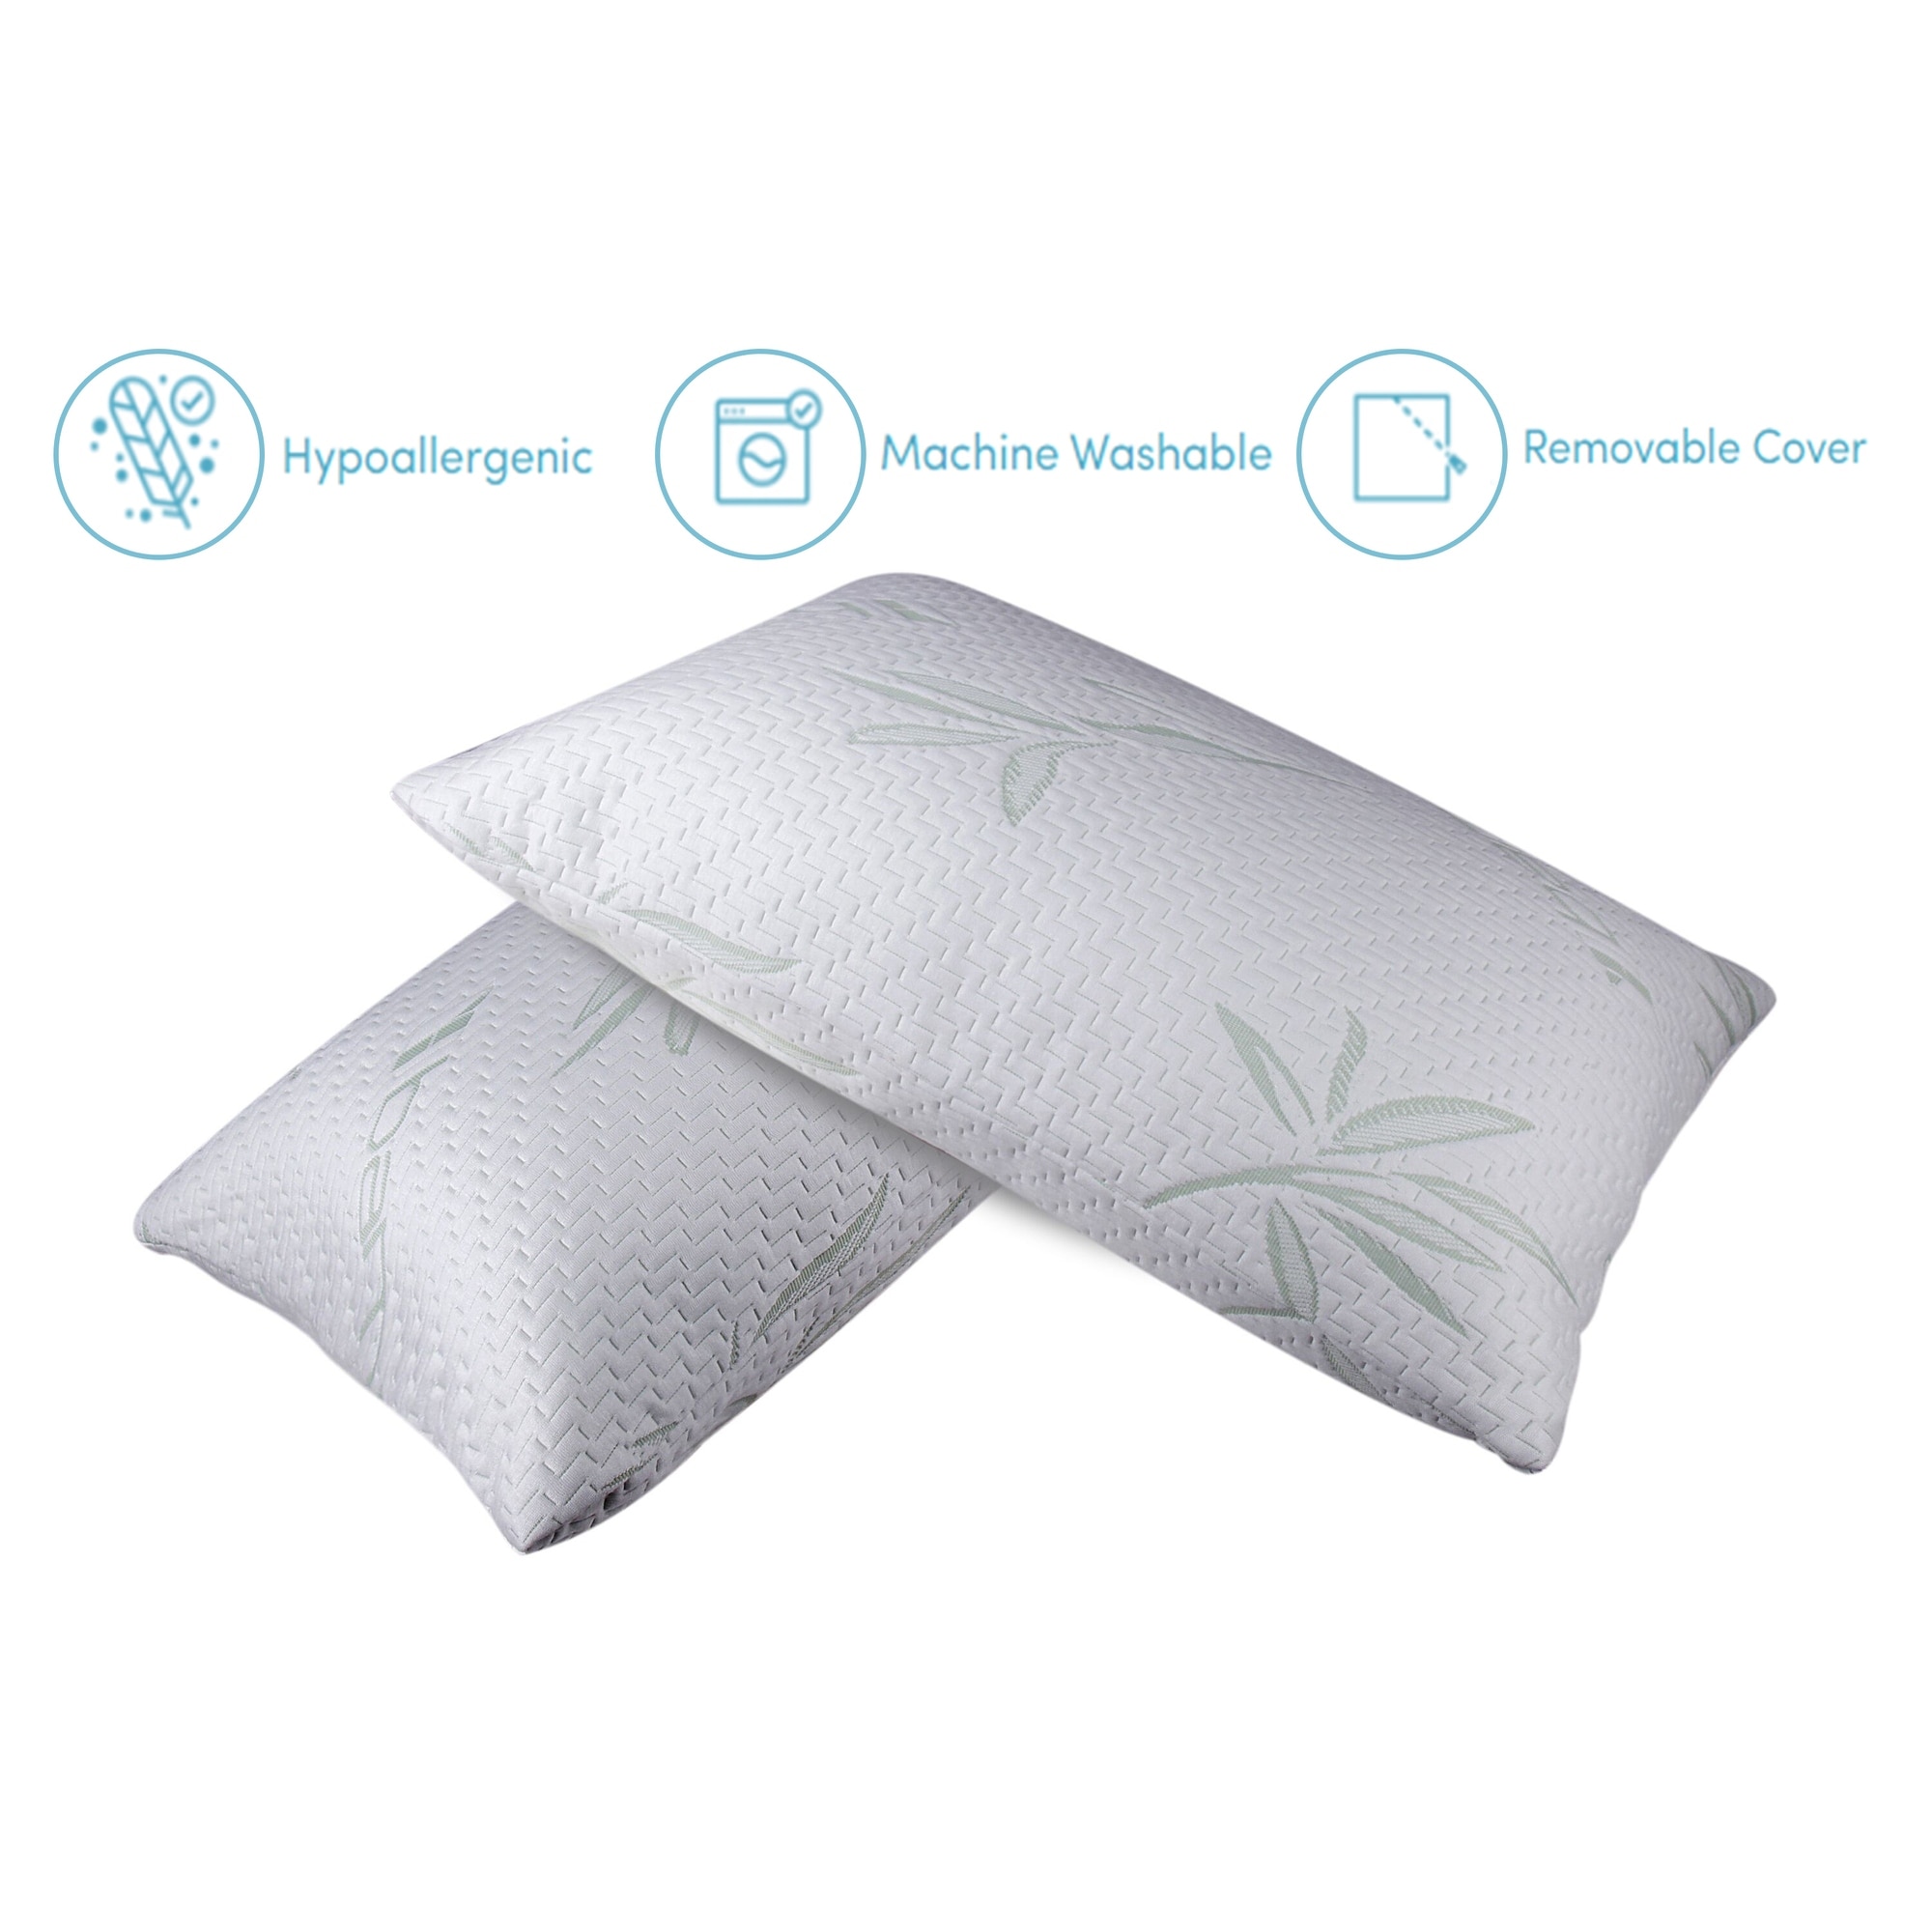 https://ak1.ostkcdn.com/images/products/is/images/direct/a92afe20fca38480825462ccb1c981a62e7c07e3/Home-Sweet-Home-Hypoallergenic-Memory-Foam-Rayon-from-Bamboo-Pillow.jpg